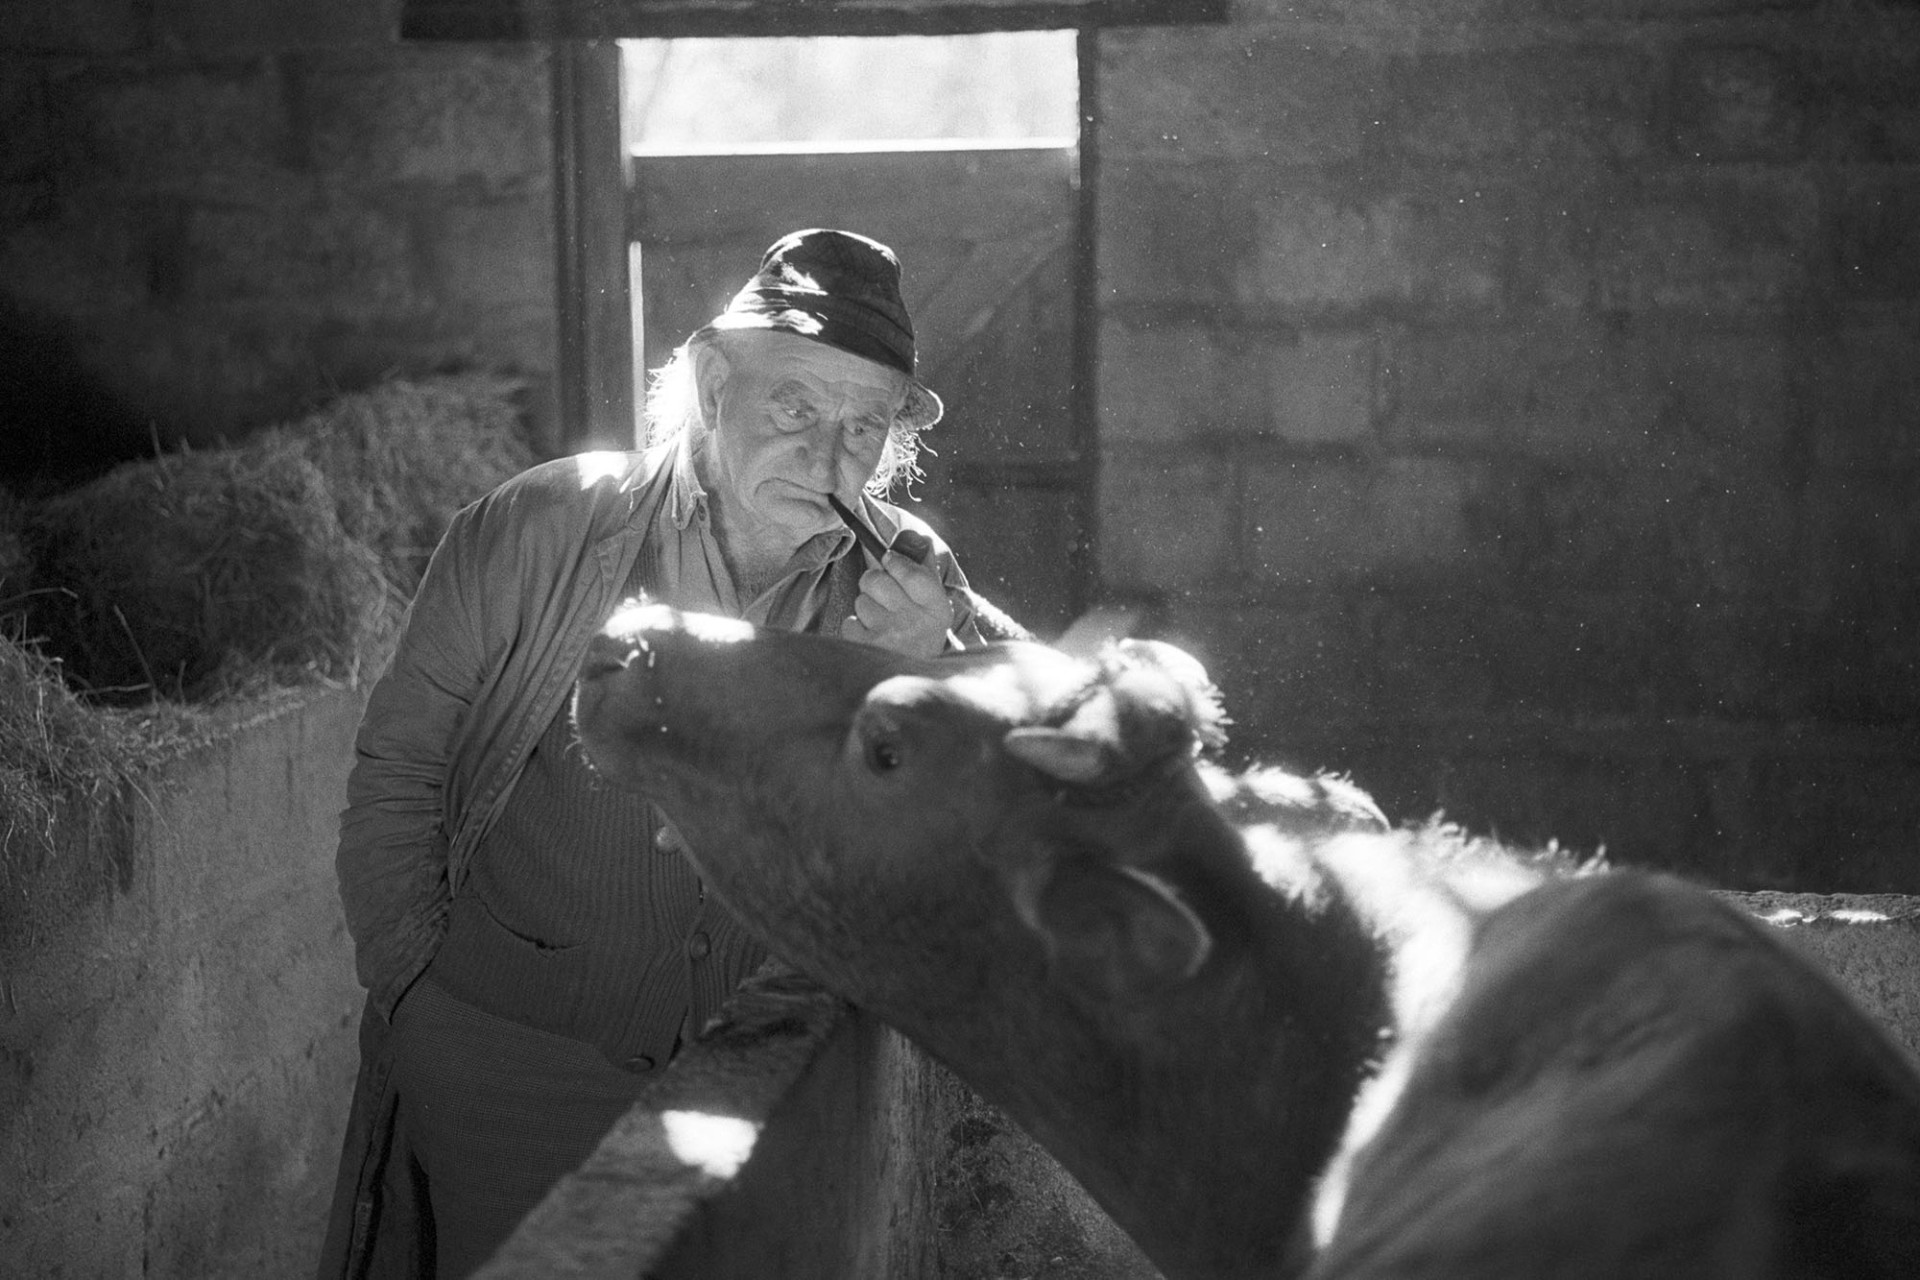 Farmer in sunlit shed with cow, smoking pipe, no, the farmer not the cow, silly! 
[Archie Parkhouse looking at his cow in a shed at Millhams, Dolton. He is smoking a pipe and is lit by sunlight coming in through the gap above the barn door.]